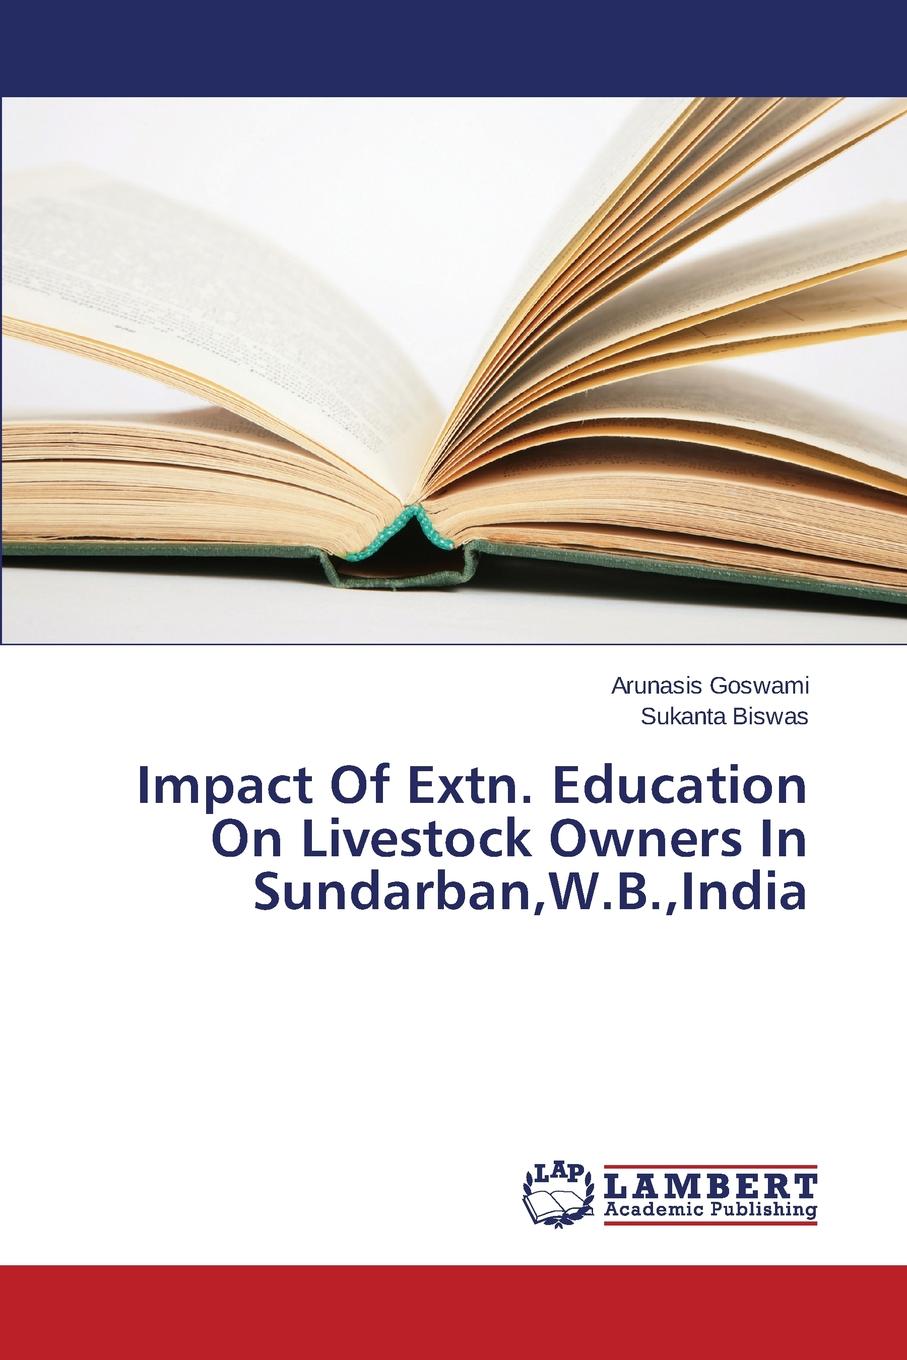 Impact Of Extn. Education On Livestock Owners In Sundarban,W.B.,India